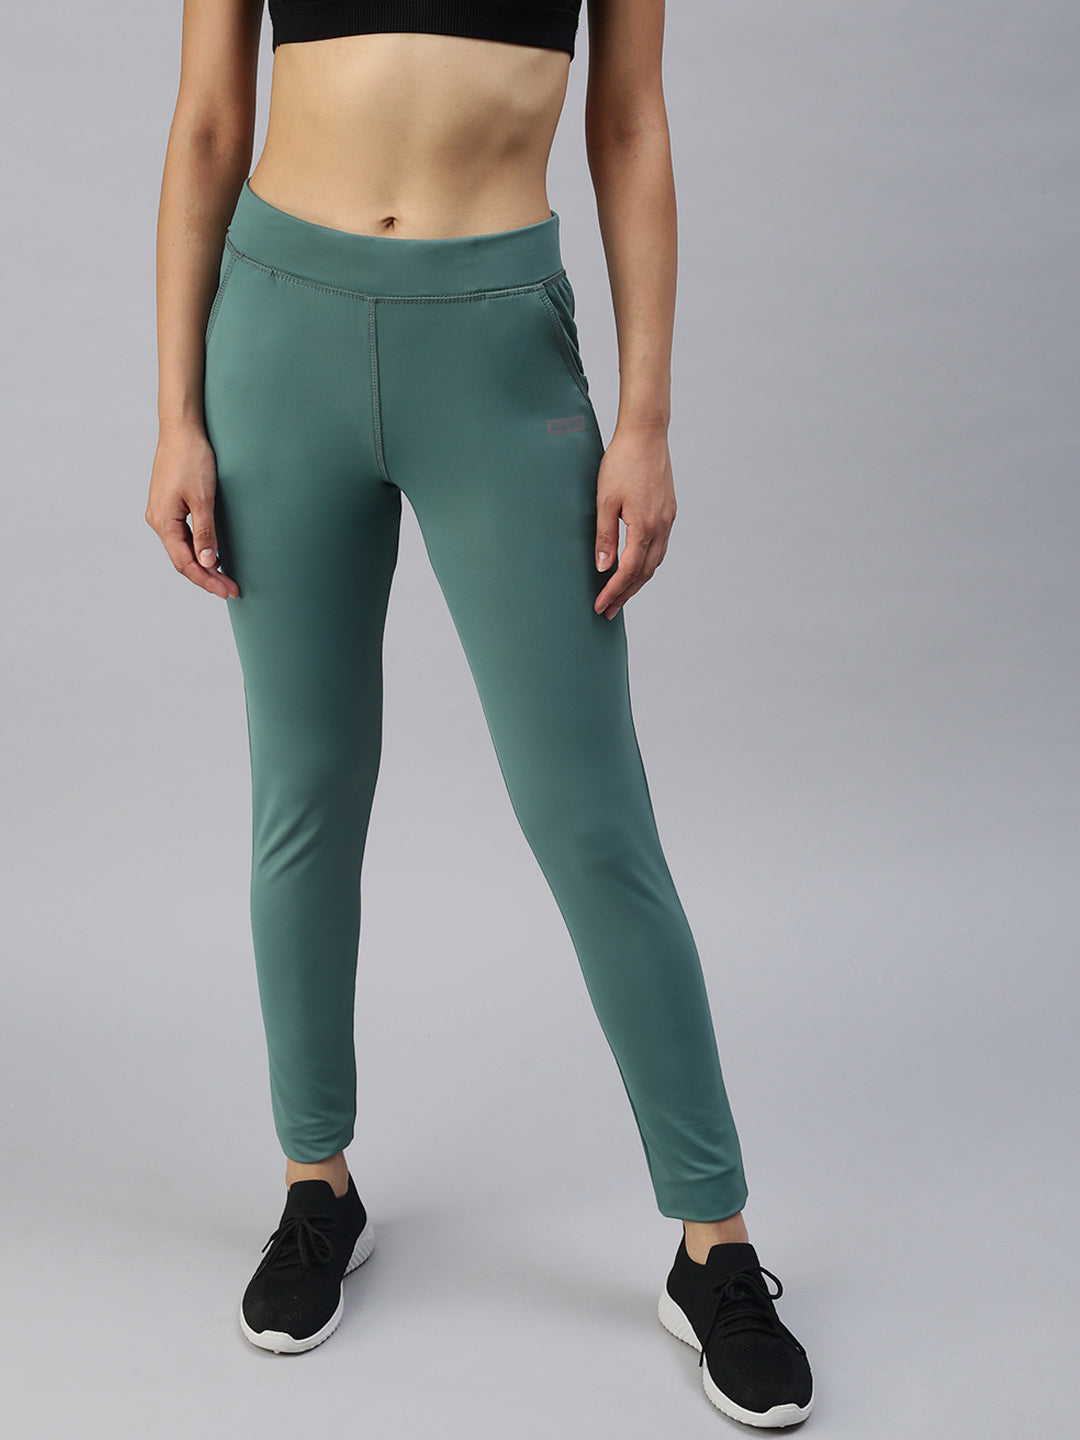 Women's Green Solid Track Pants